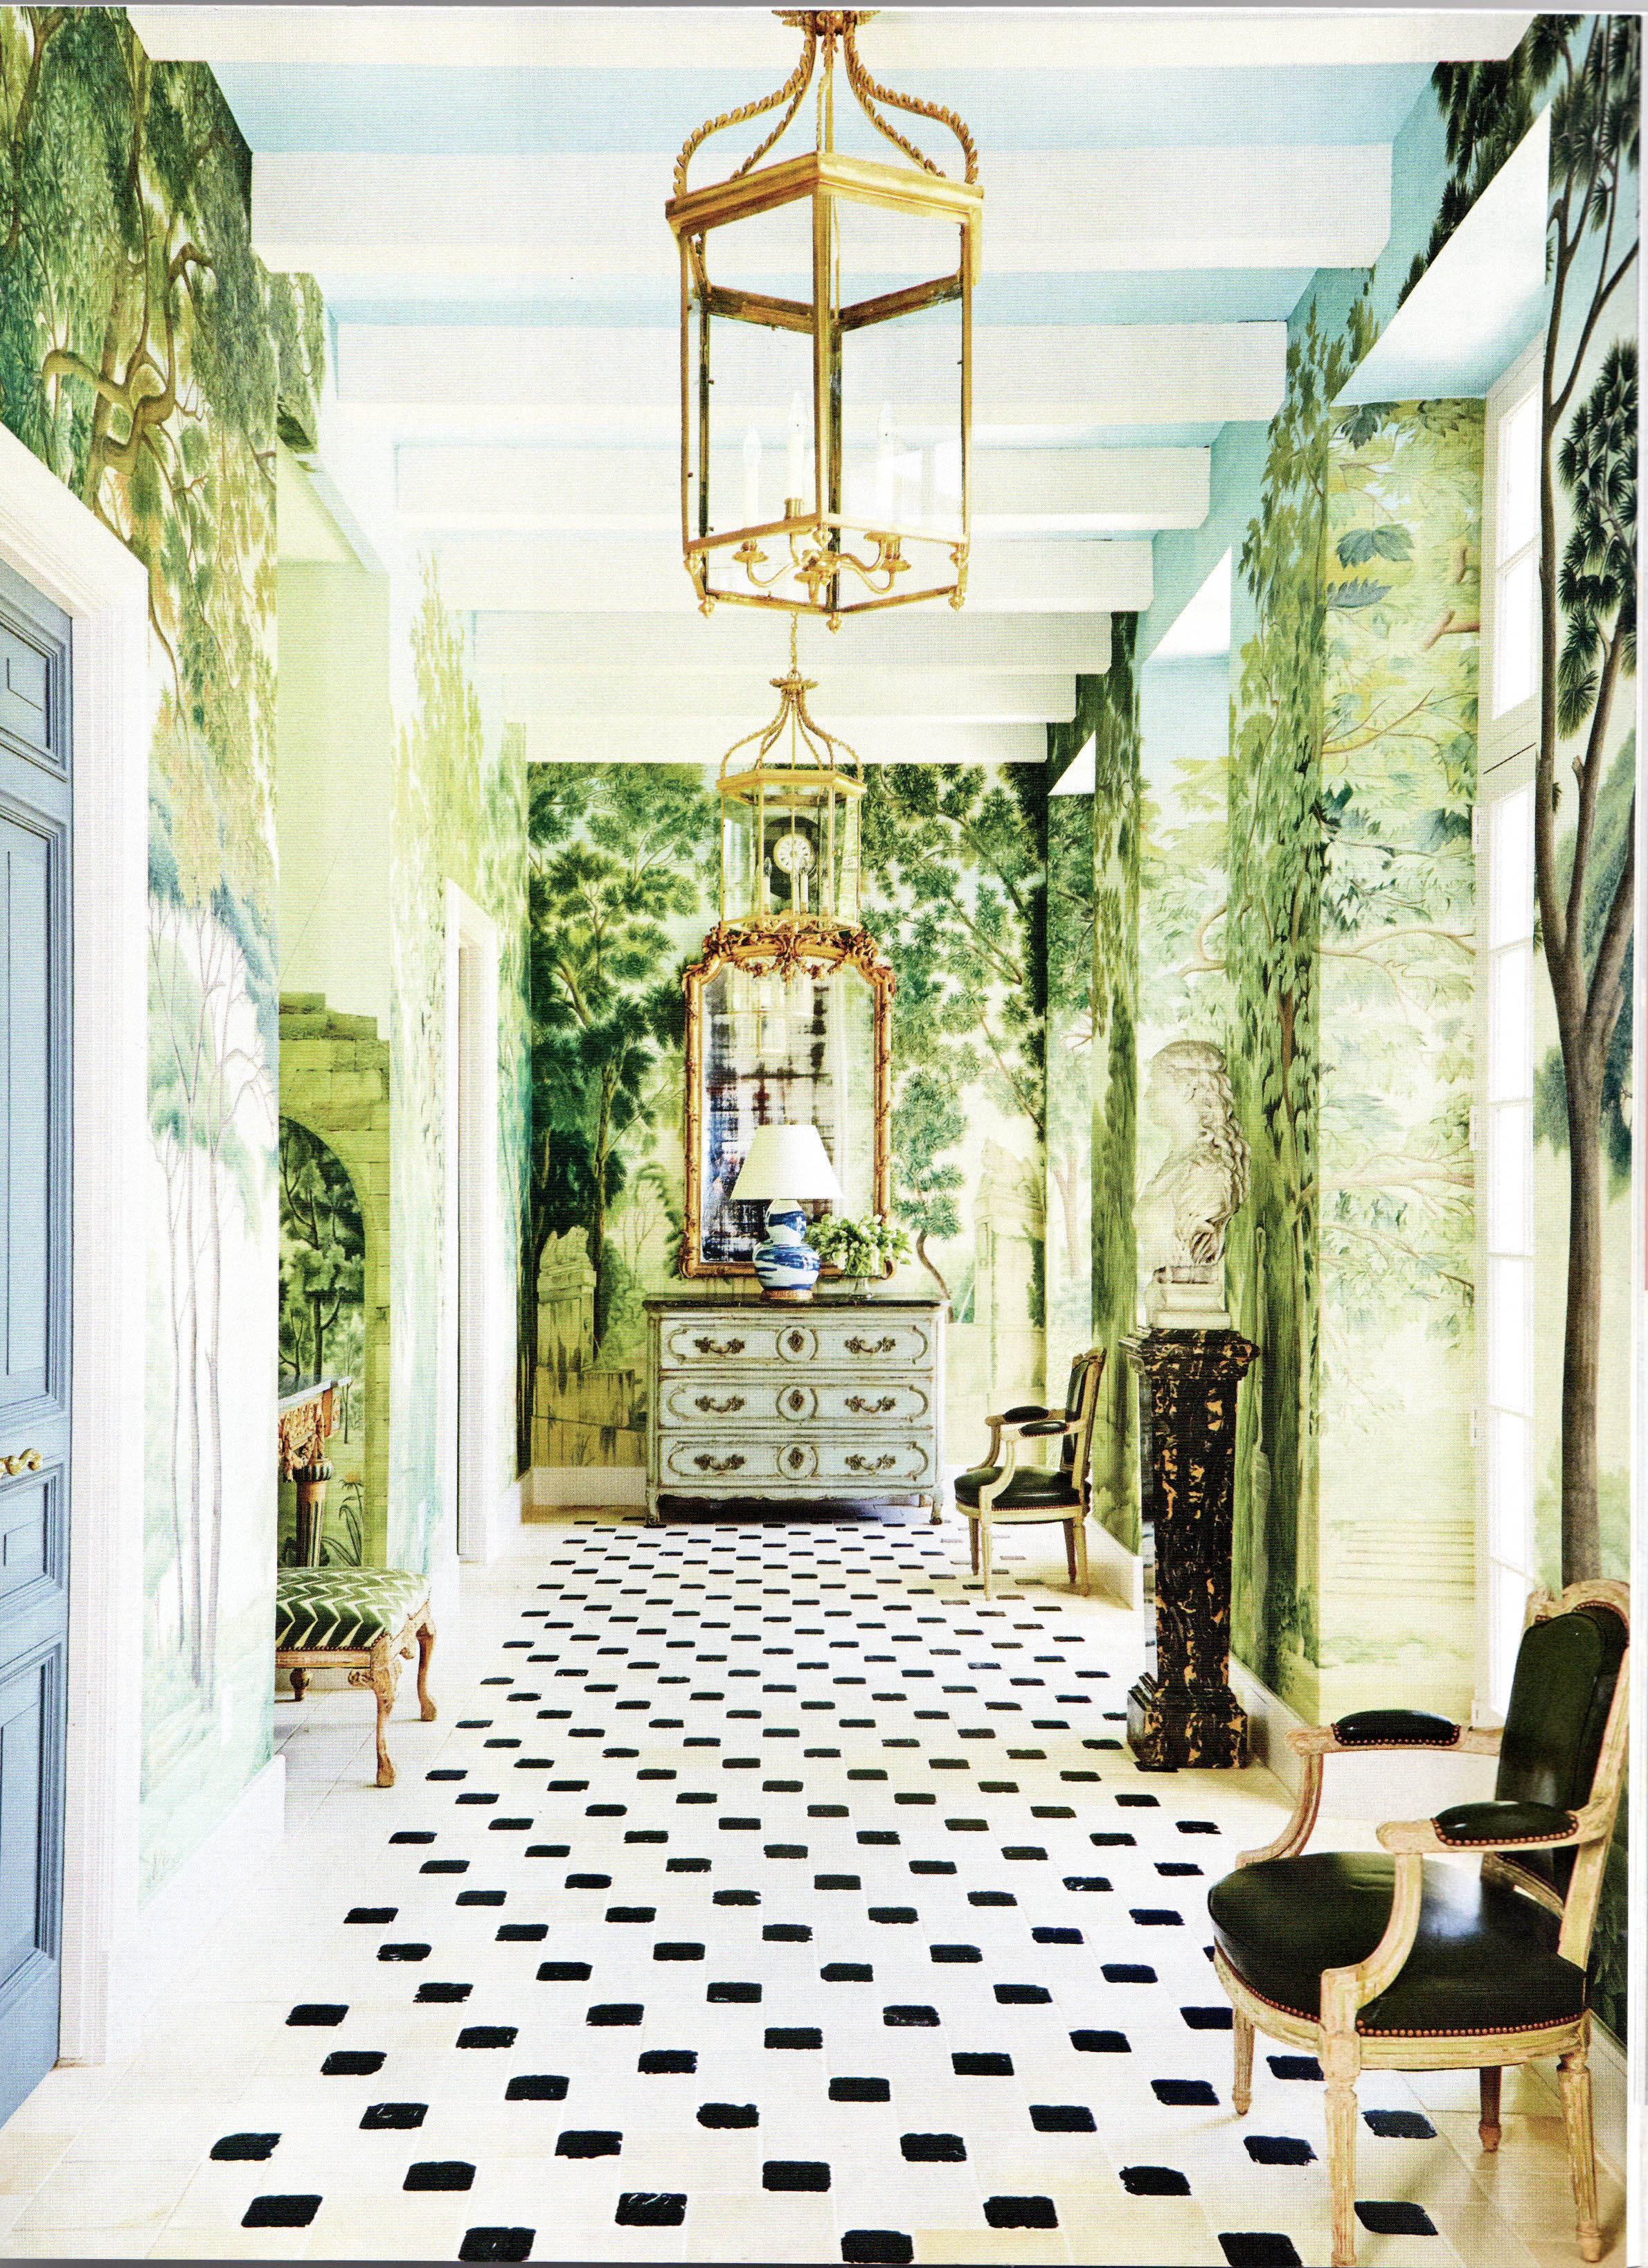 AD Architectural Digest August 2014 | IKSEL